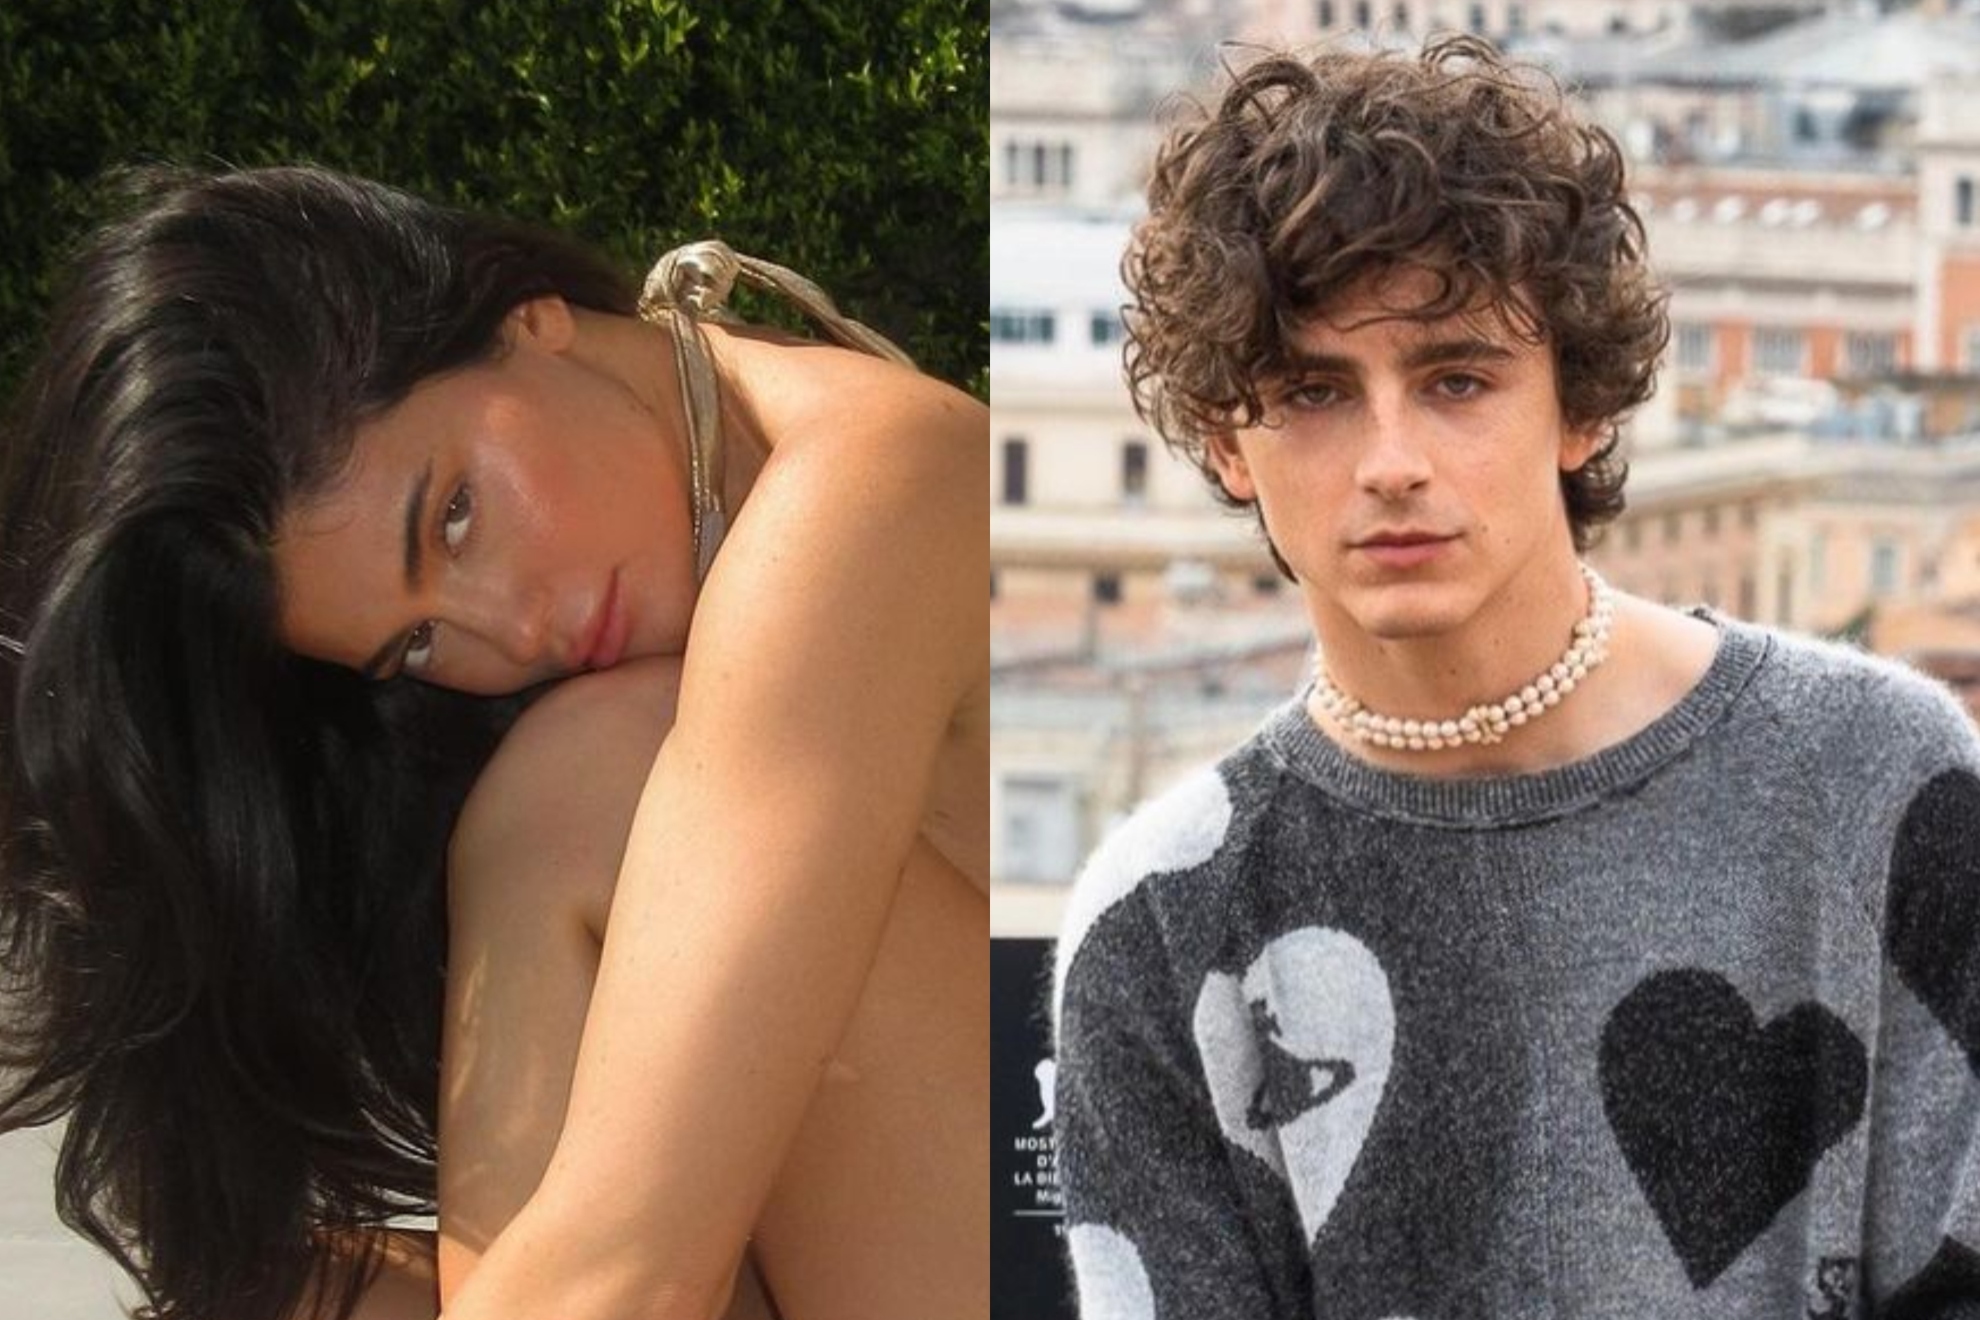 Kylie Jenner and Timothe Chalamet: The new power couple of Hollywood?